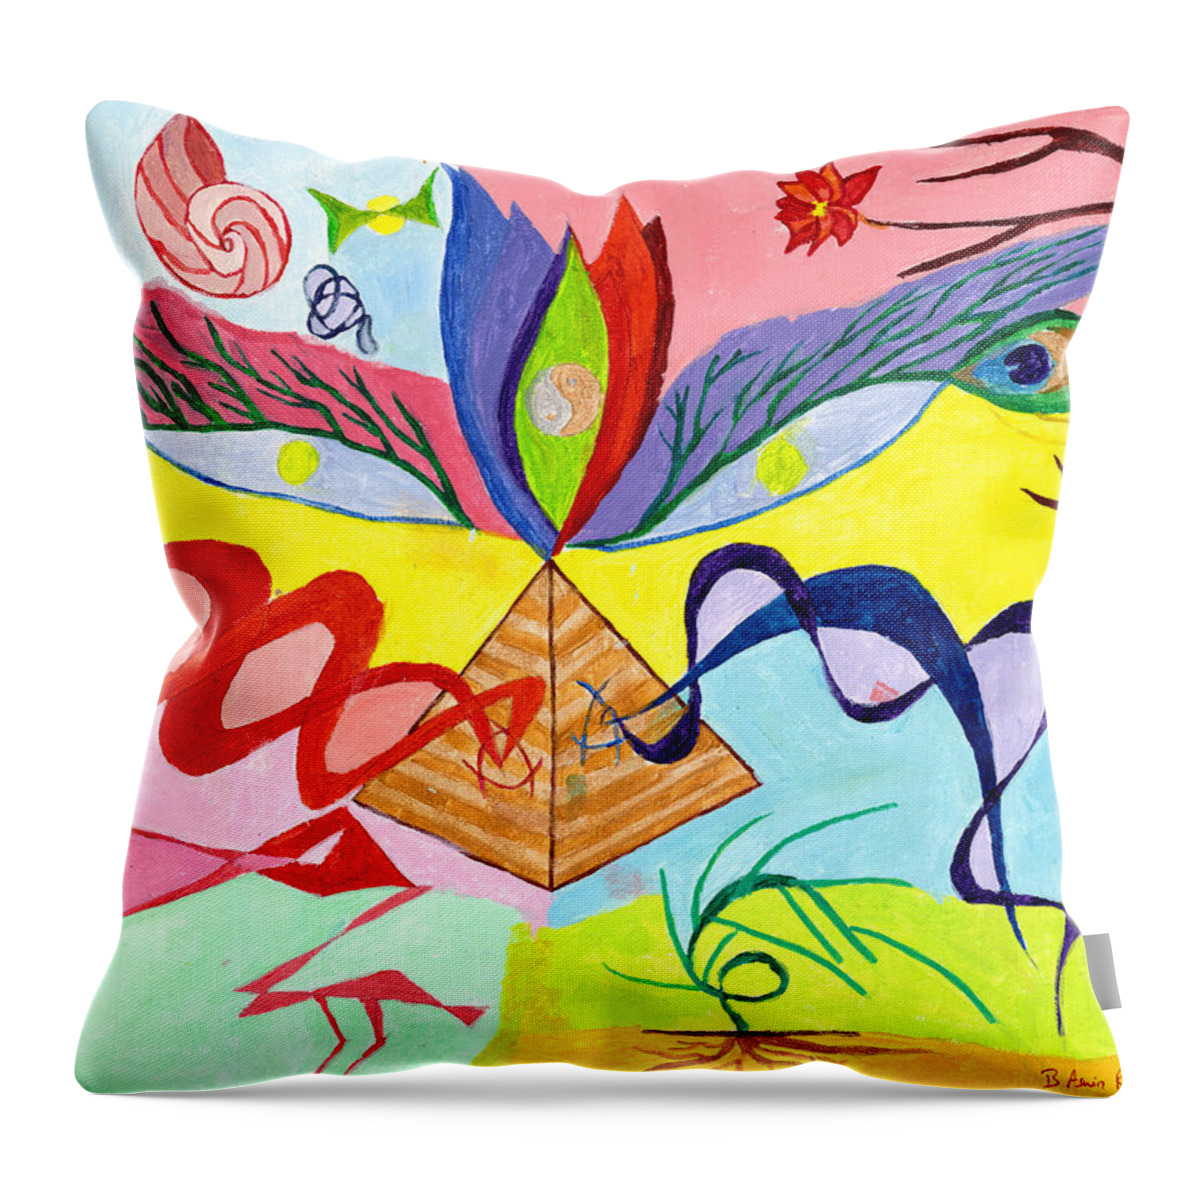 Dualism Throw Pillow featuring the painting Flaming Third Eye by B Aswin Roshan